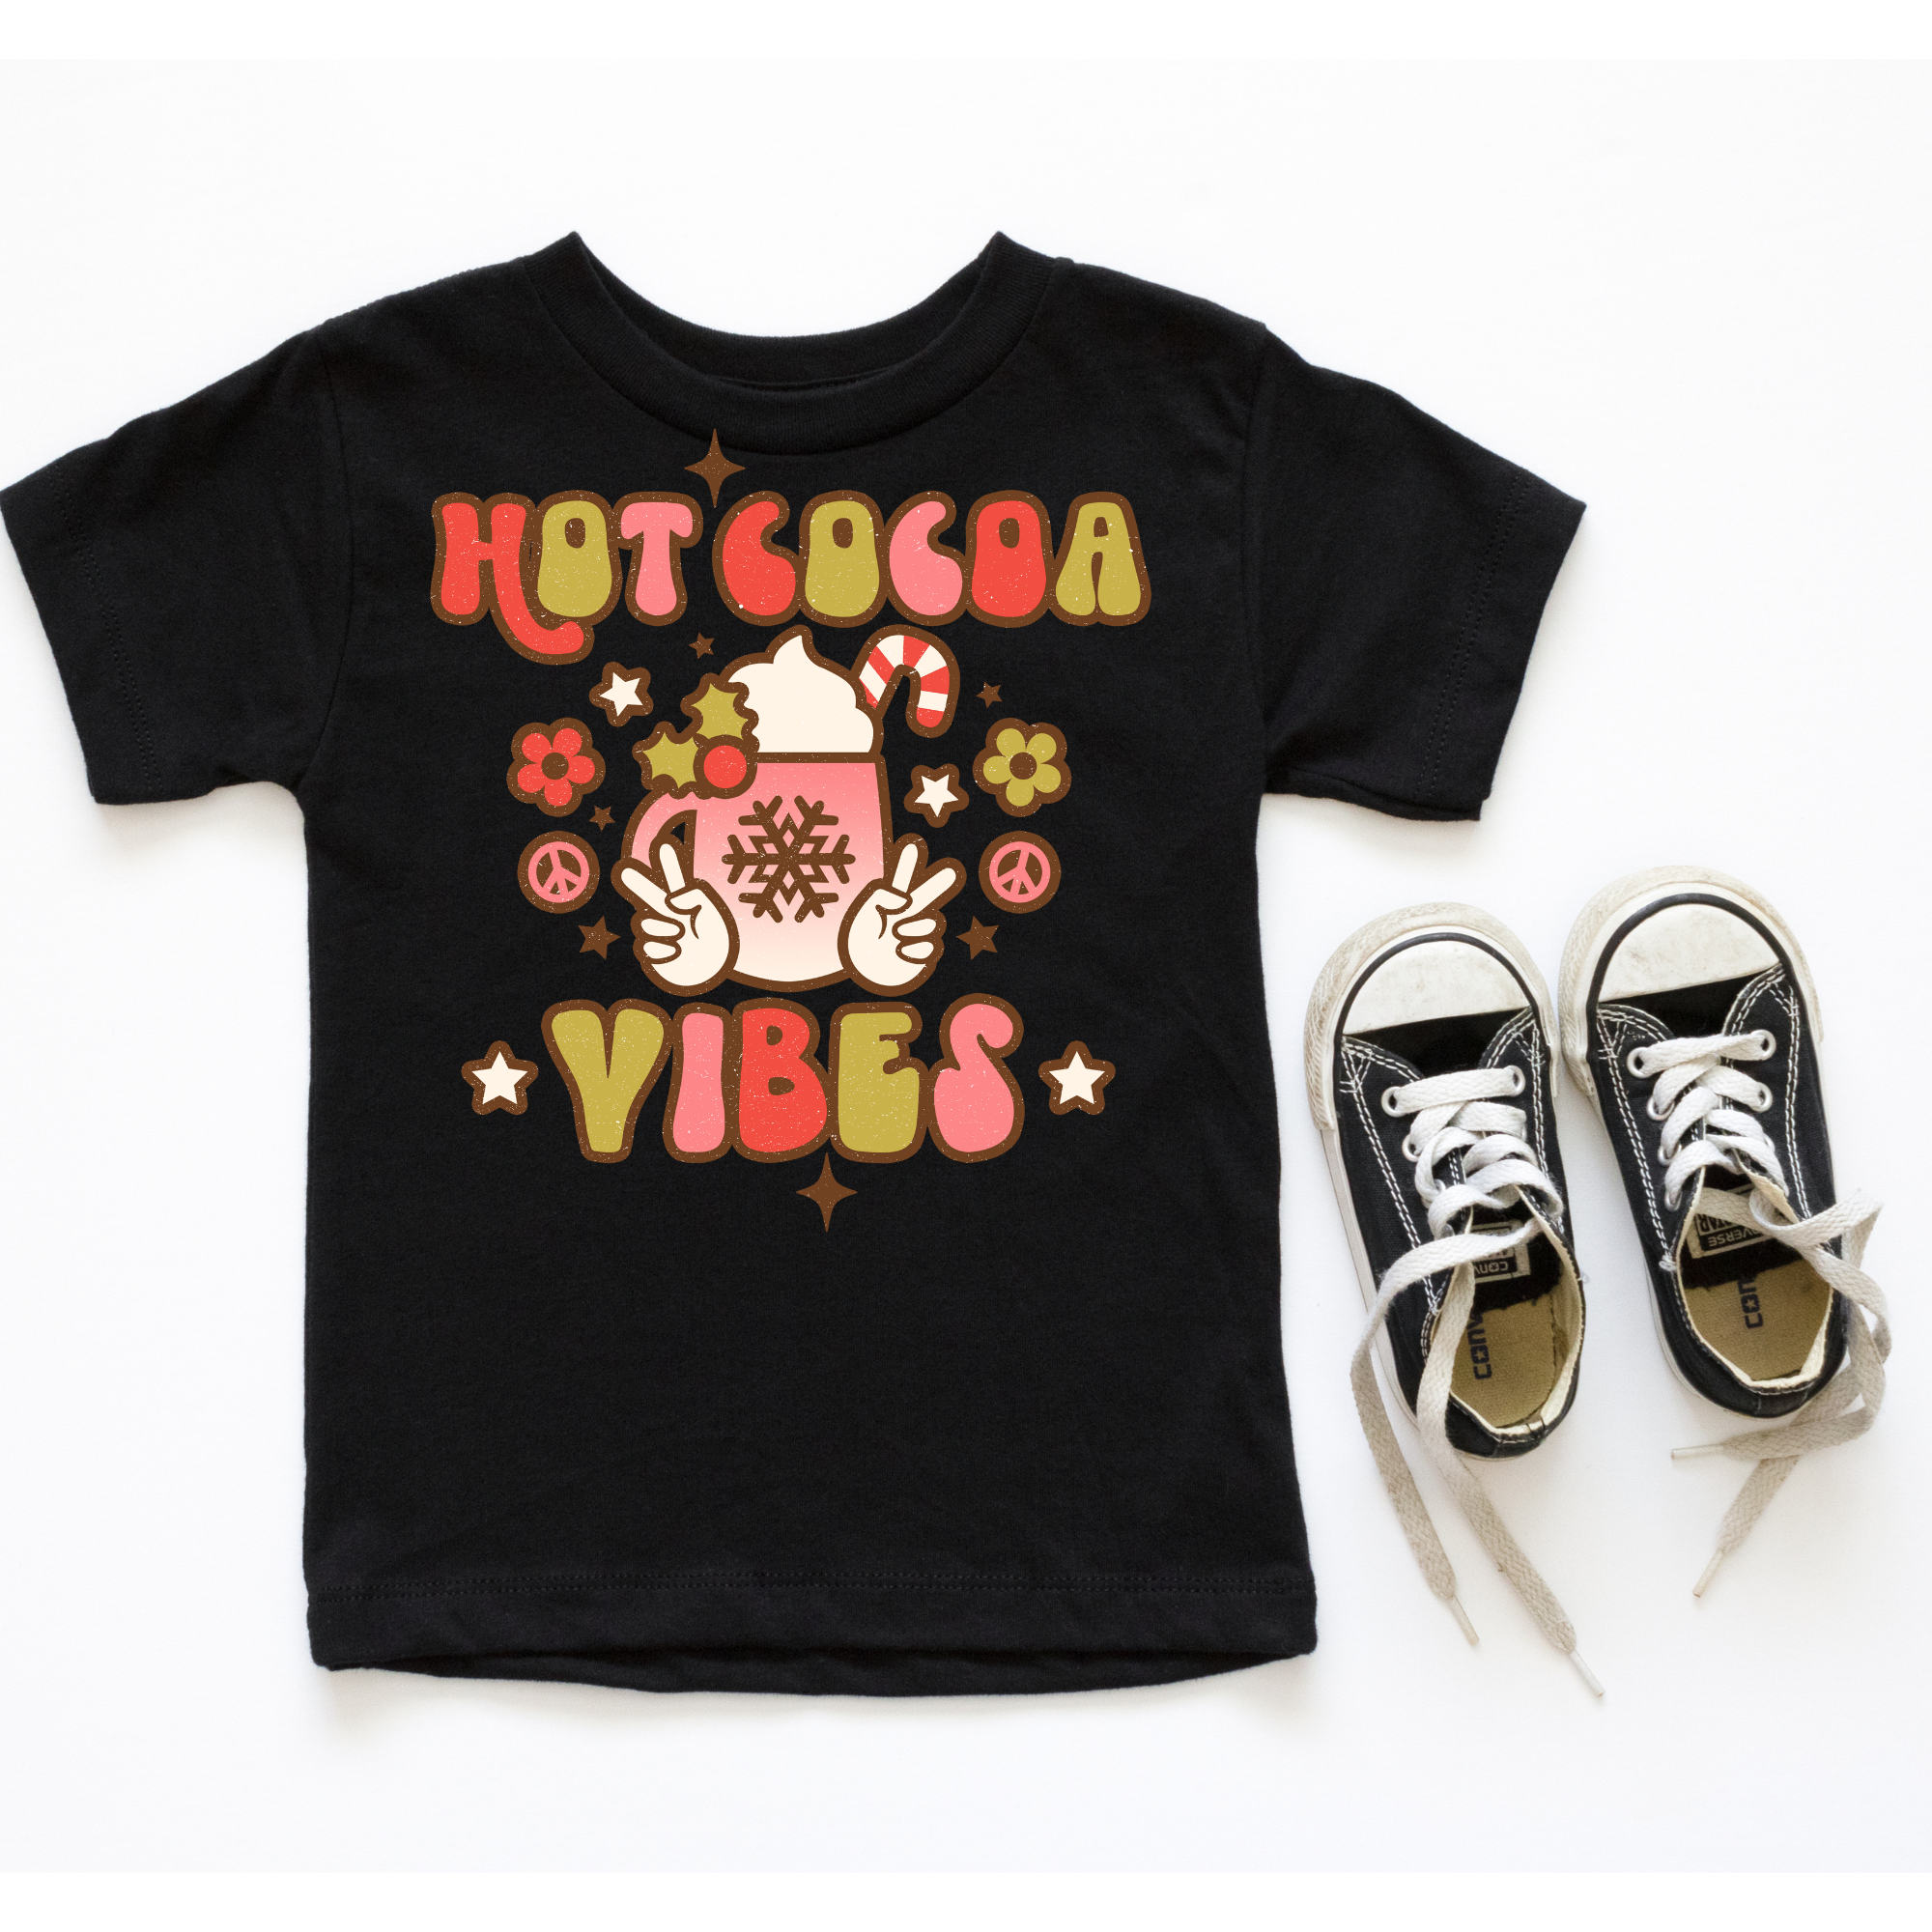 Hot Cocoa Vibes Pink Retro Tee